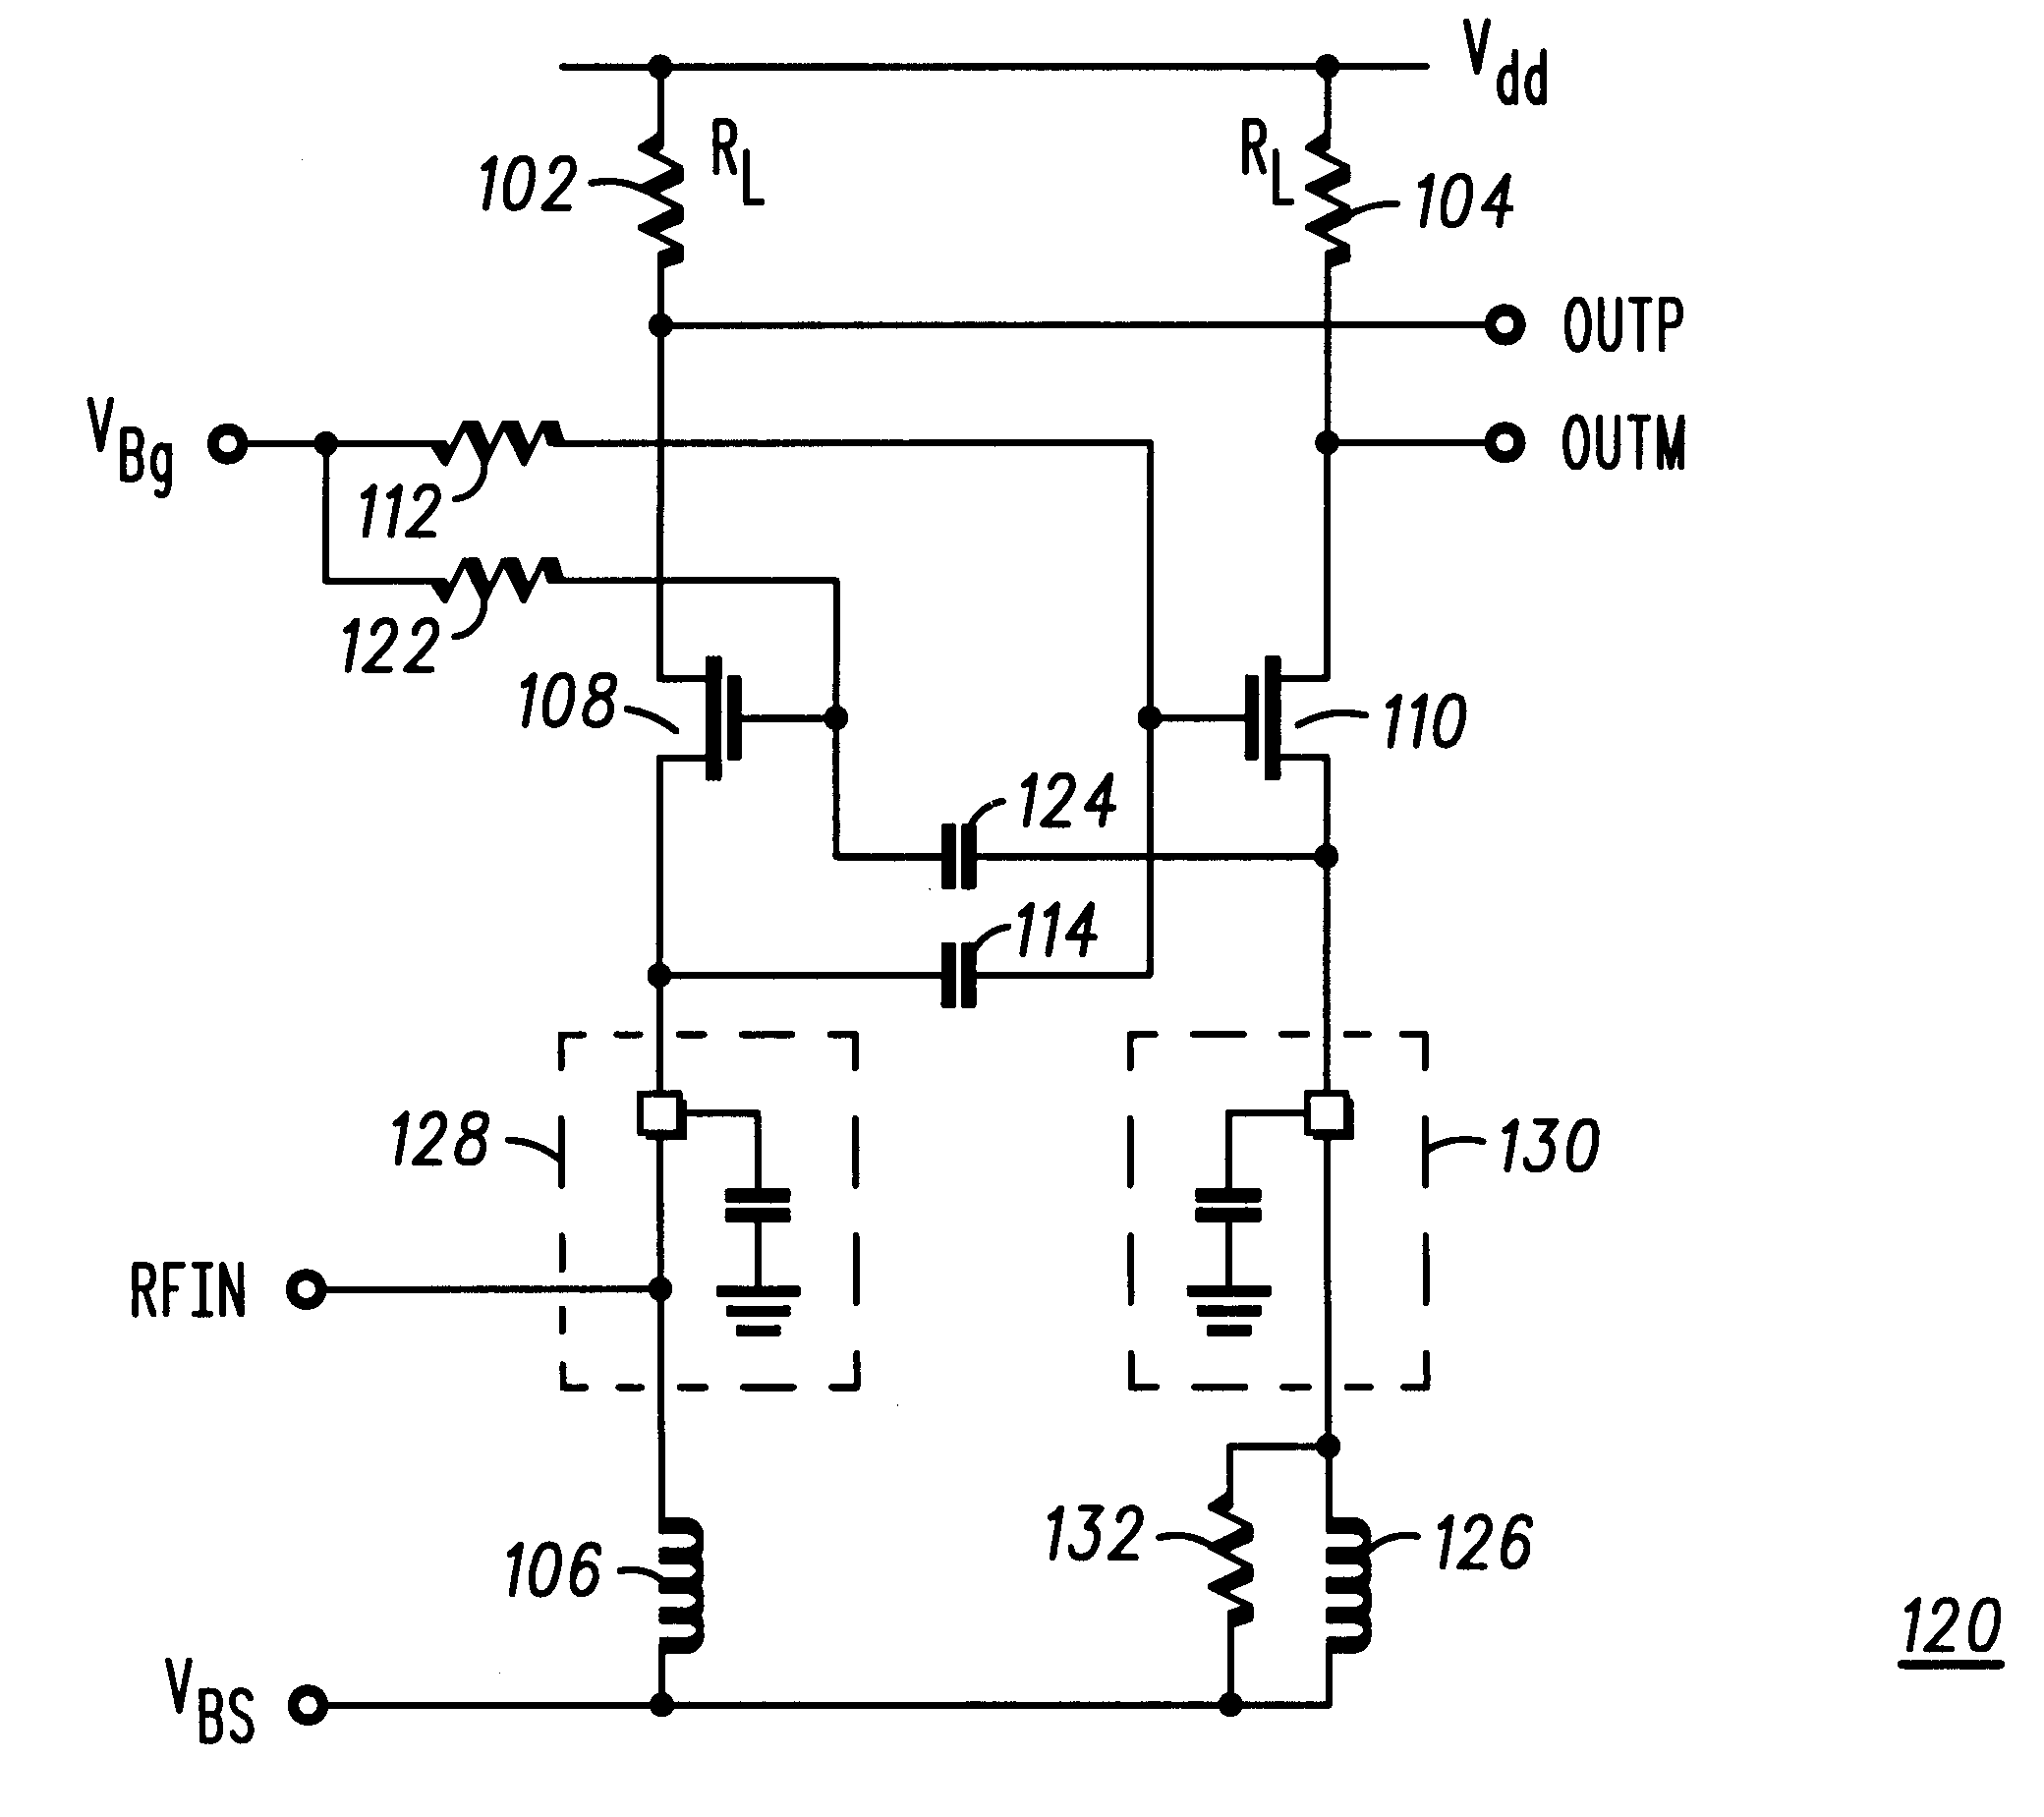 Single ended input, differential output amplifier